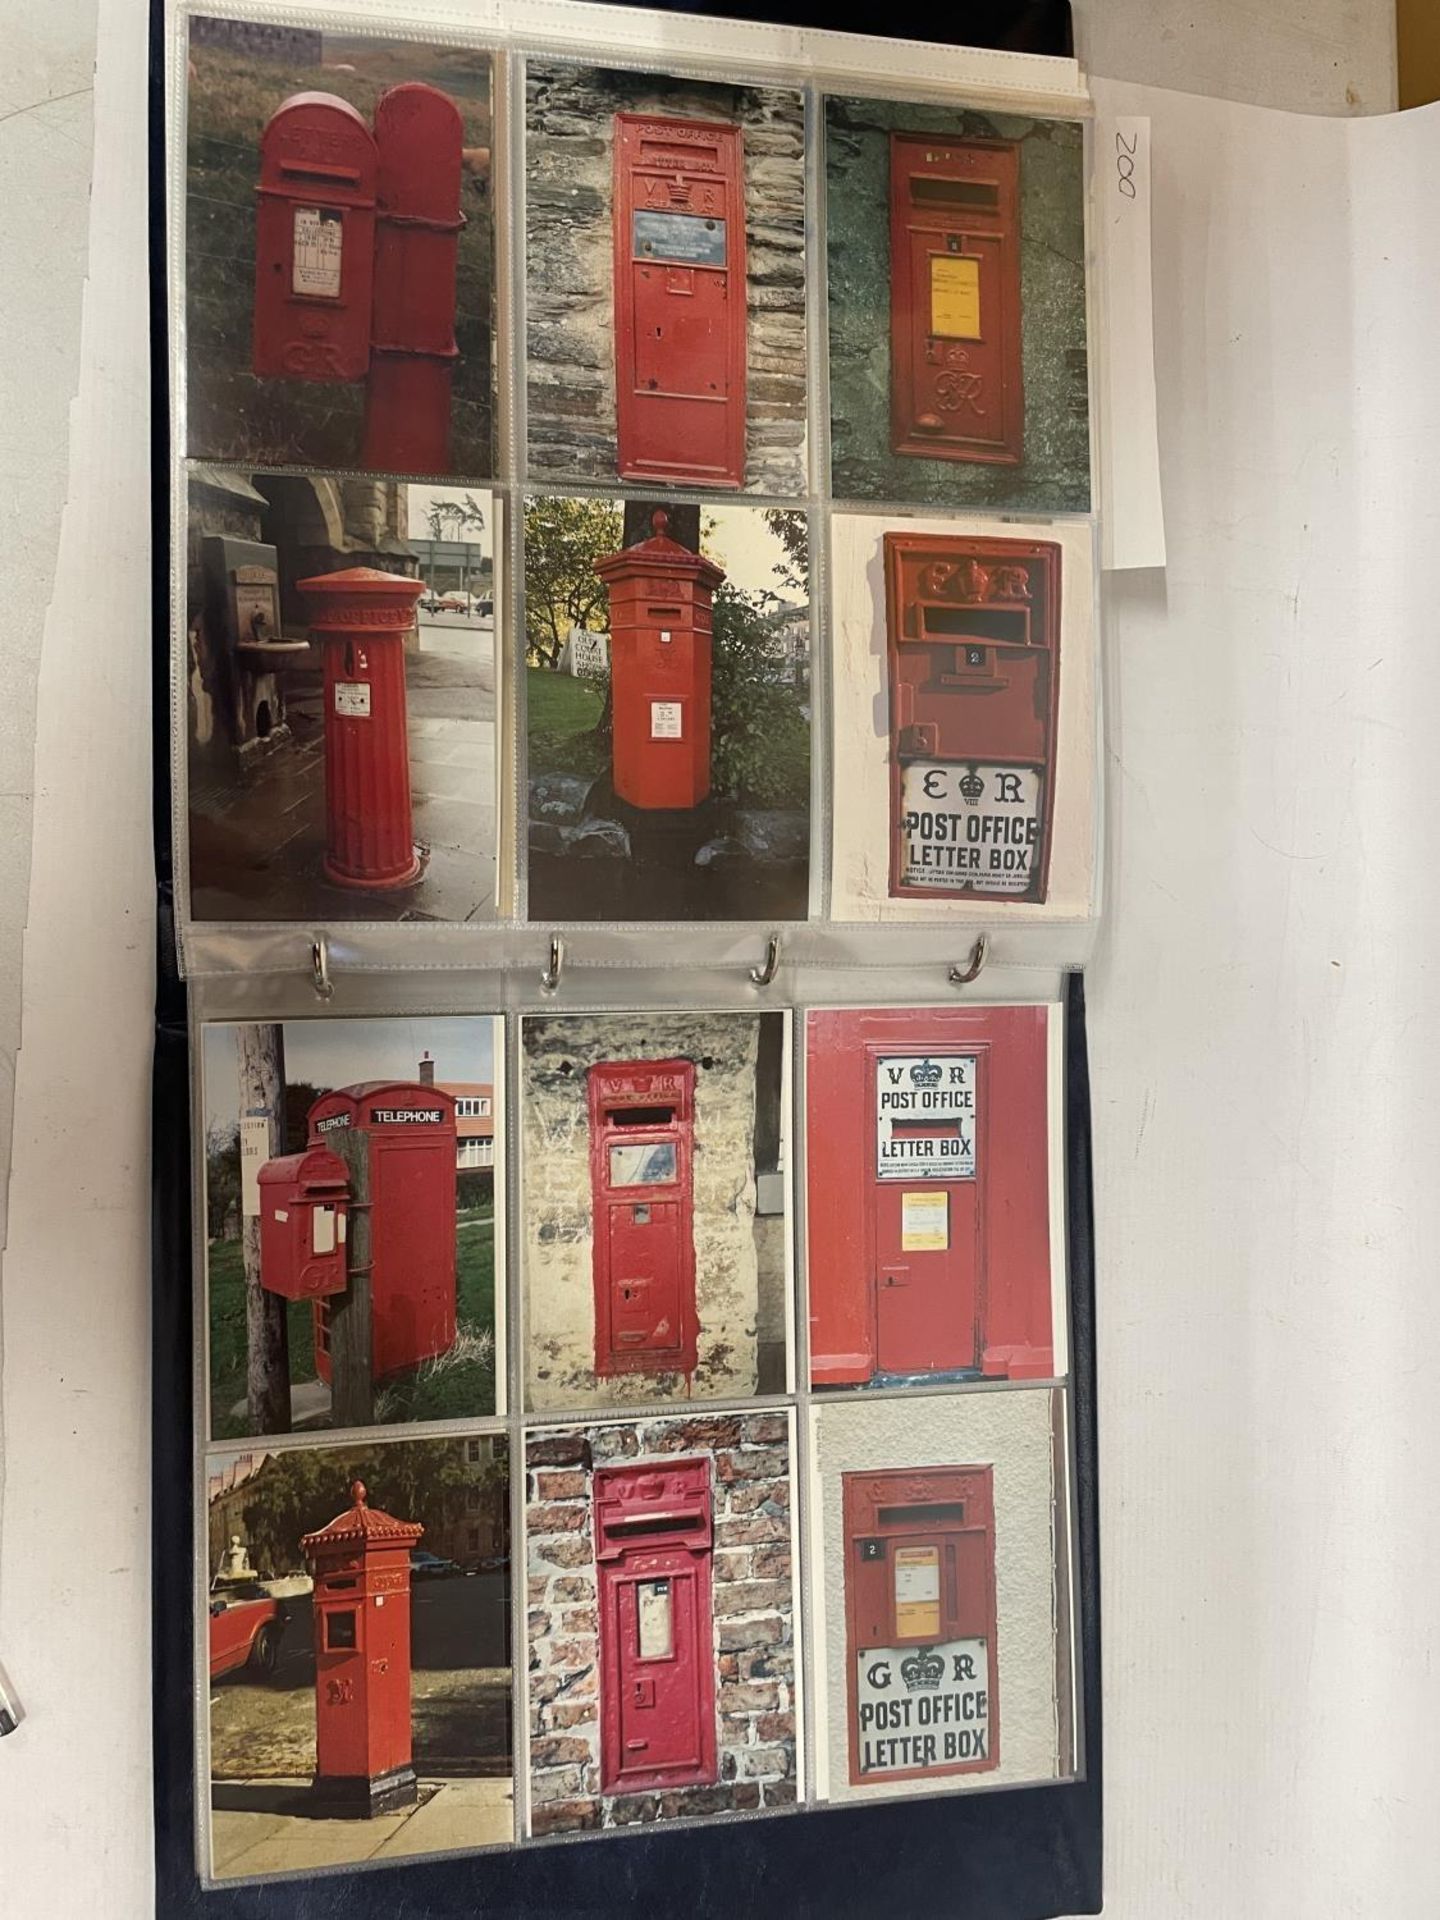 APPROXIMATELY 335 POSTCARDS RELATING TO THE NATIONAL POSTAGE MUSEUM, BATH POSTAL MUSEUM, TELECOM, - Image 9 of 11